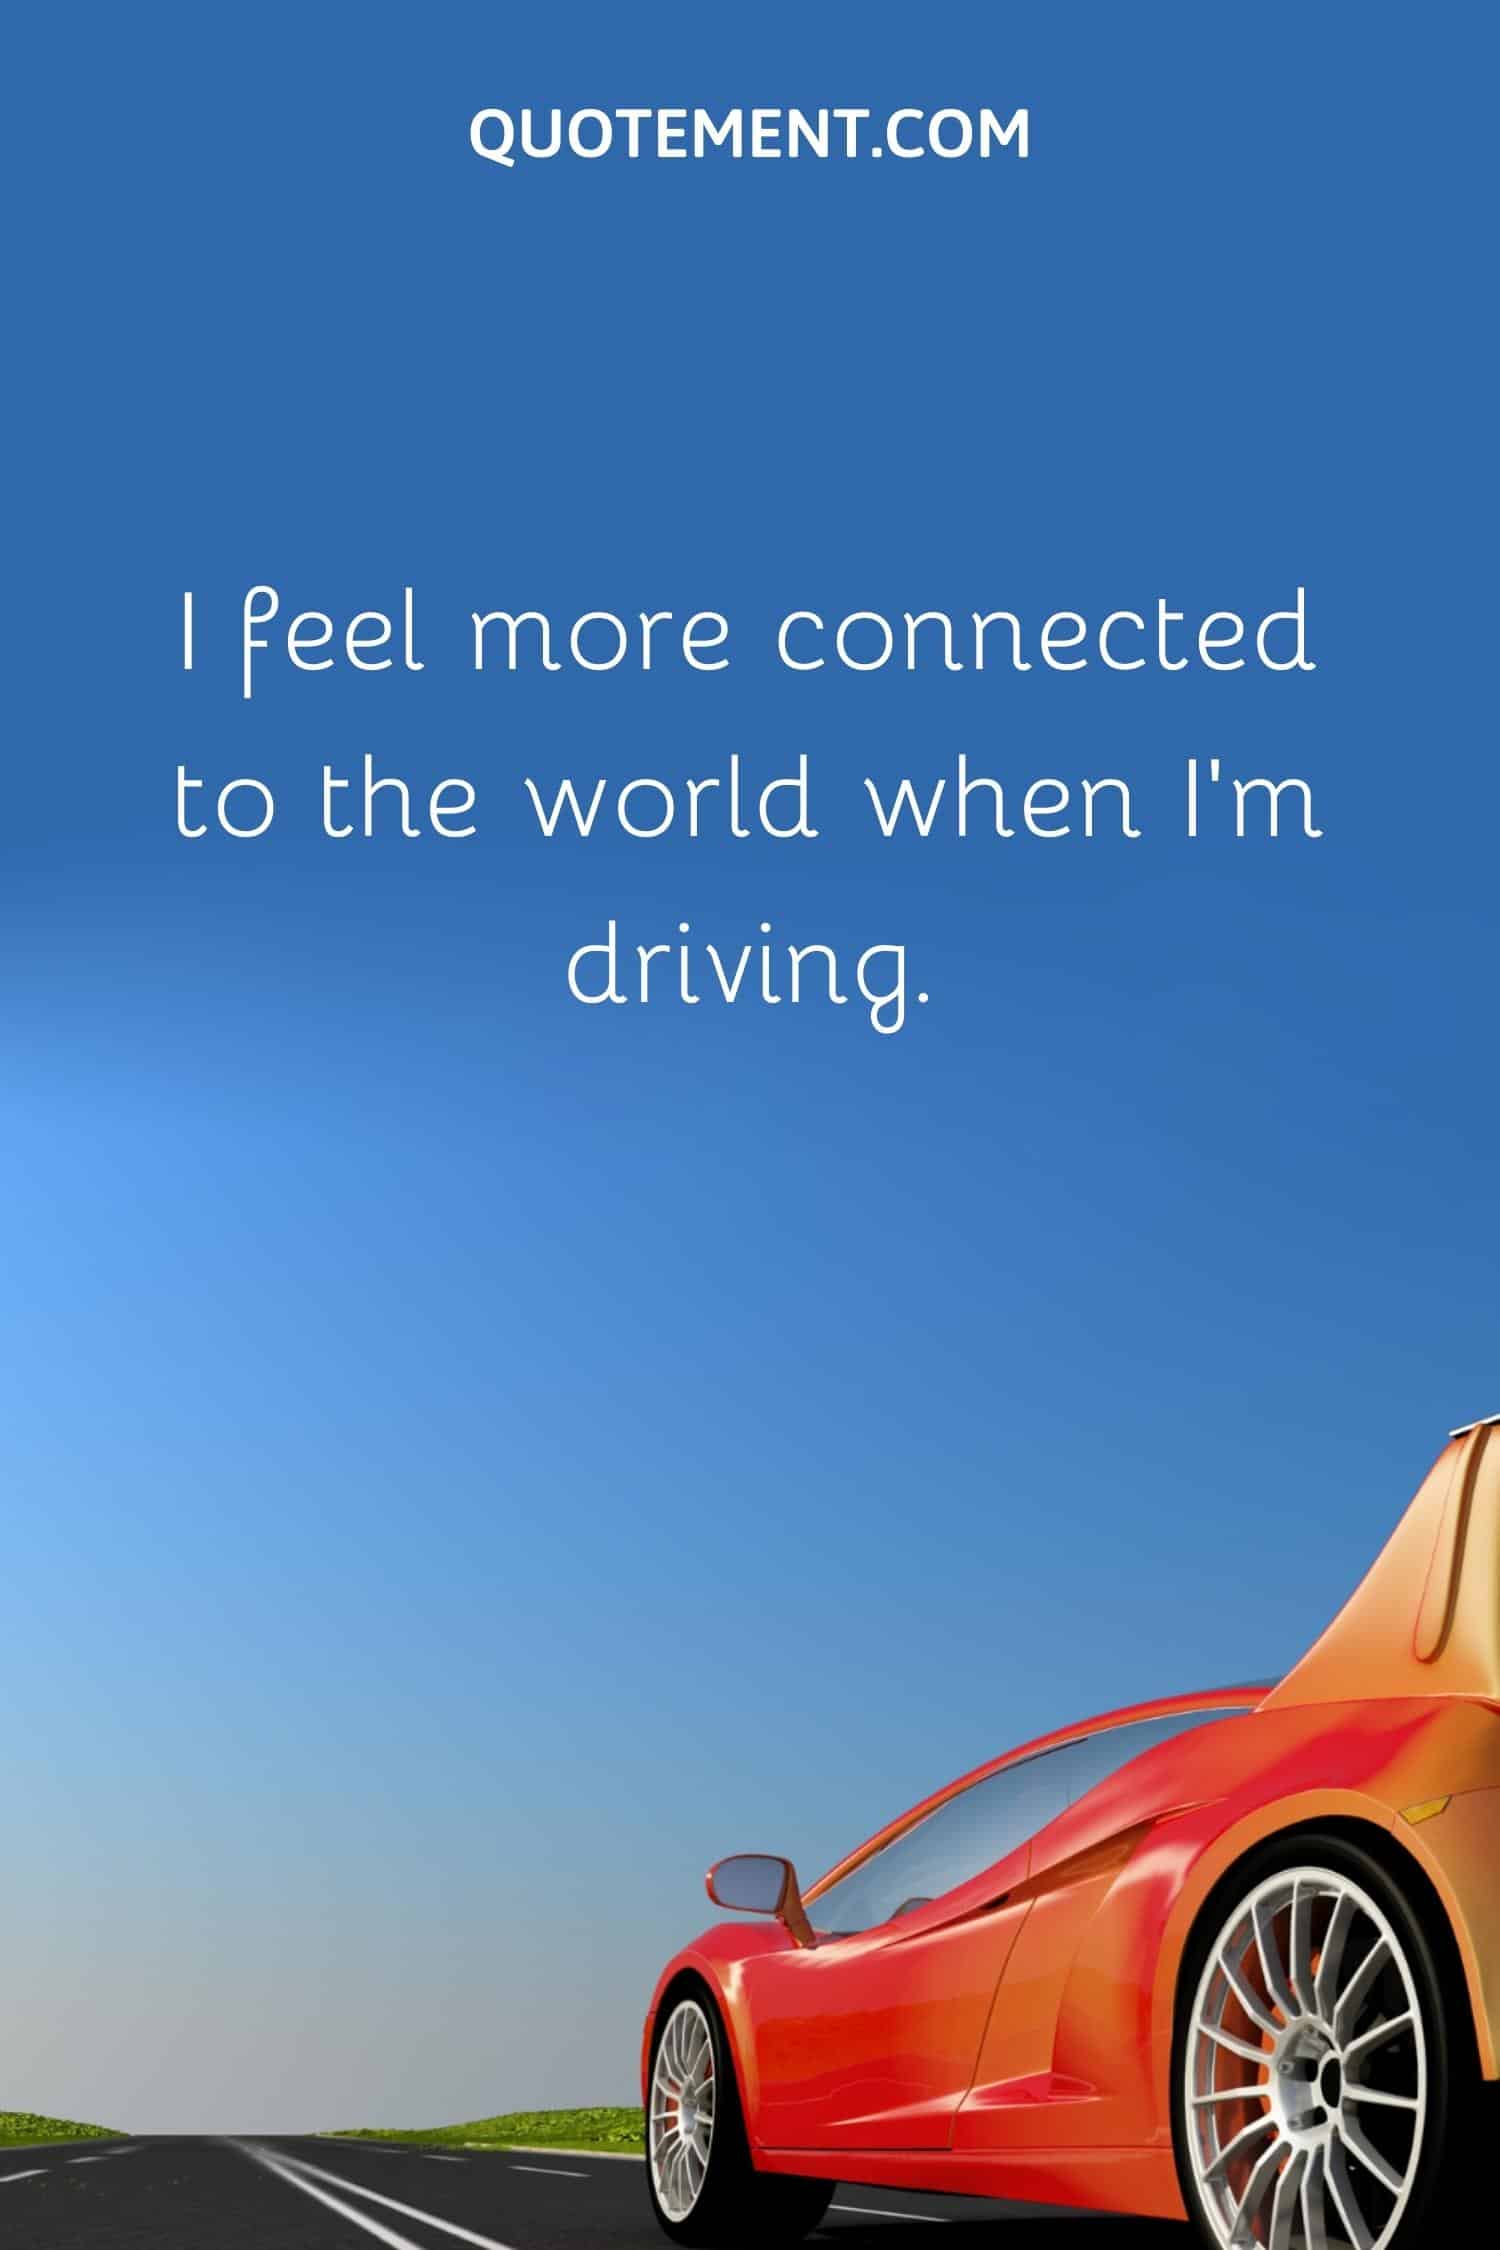 I feel more connected to the world when I'm driving.